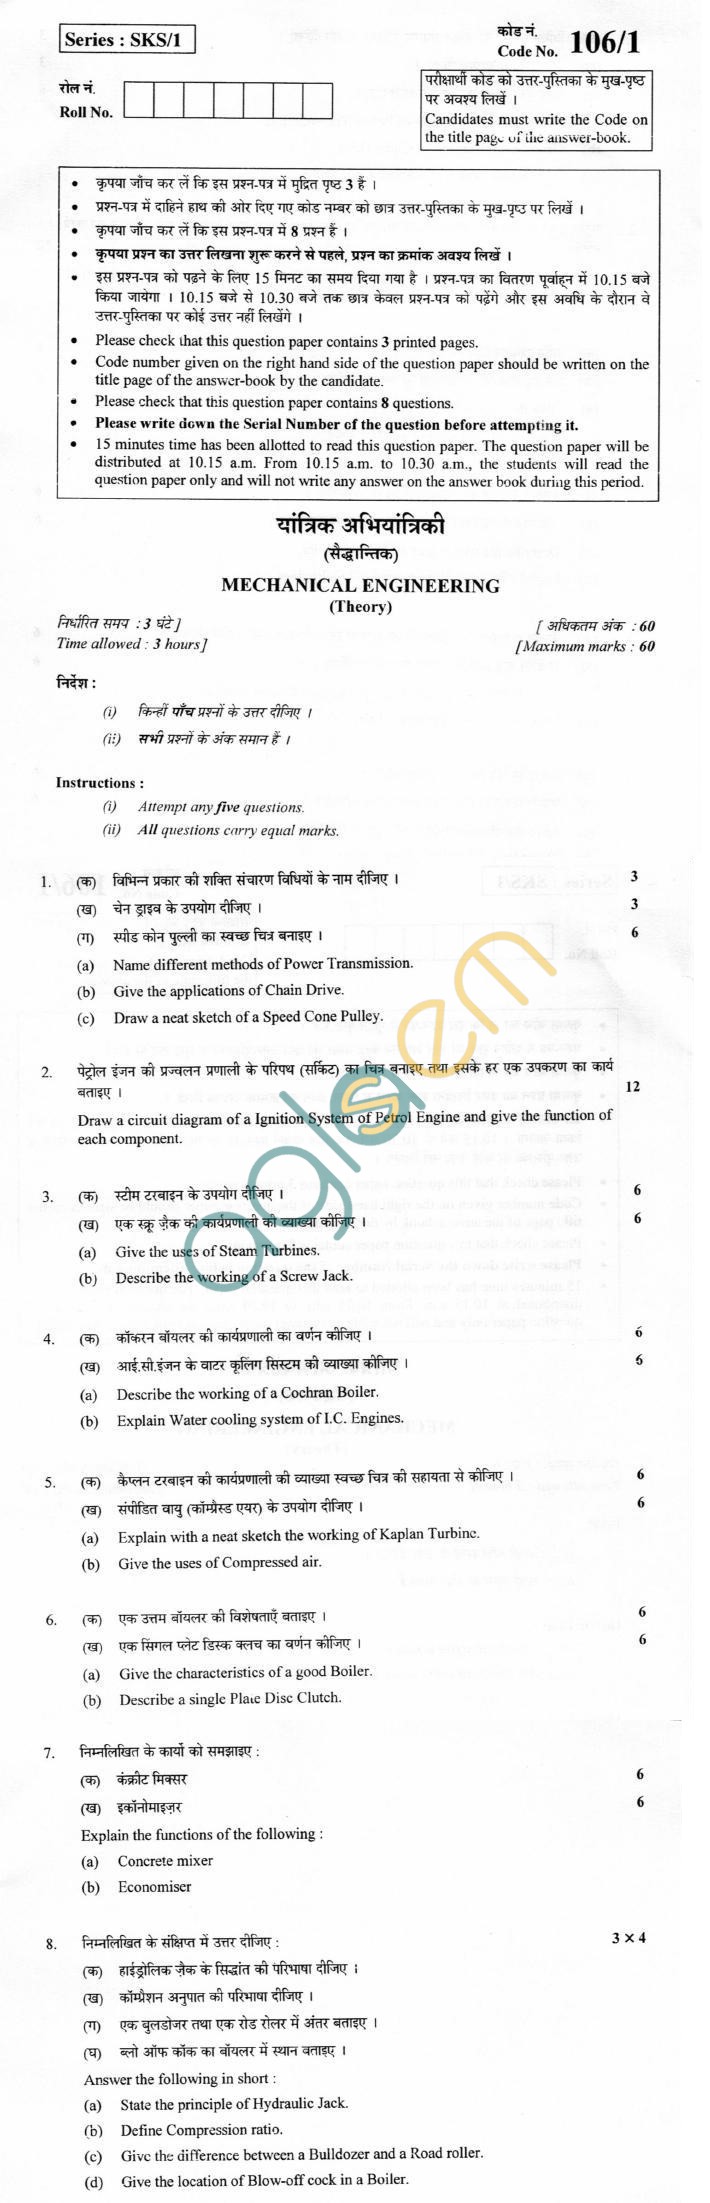 CBSE Board Exam 2013 Class XII Question Paper - Mechanical Engineering